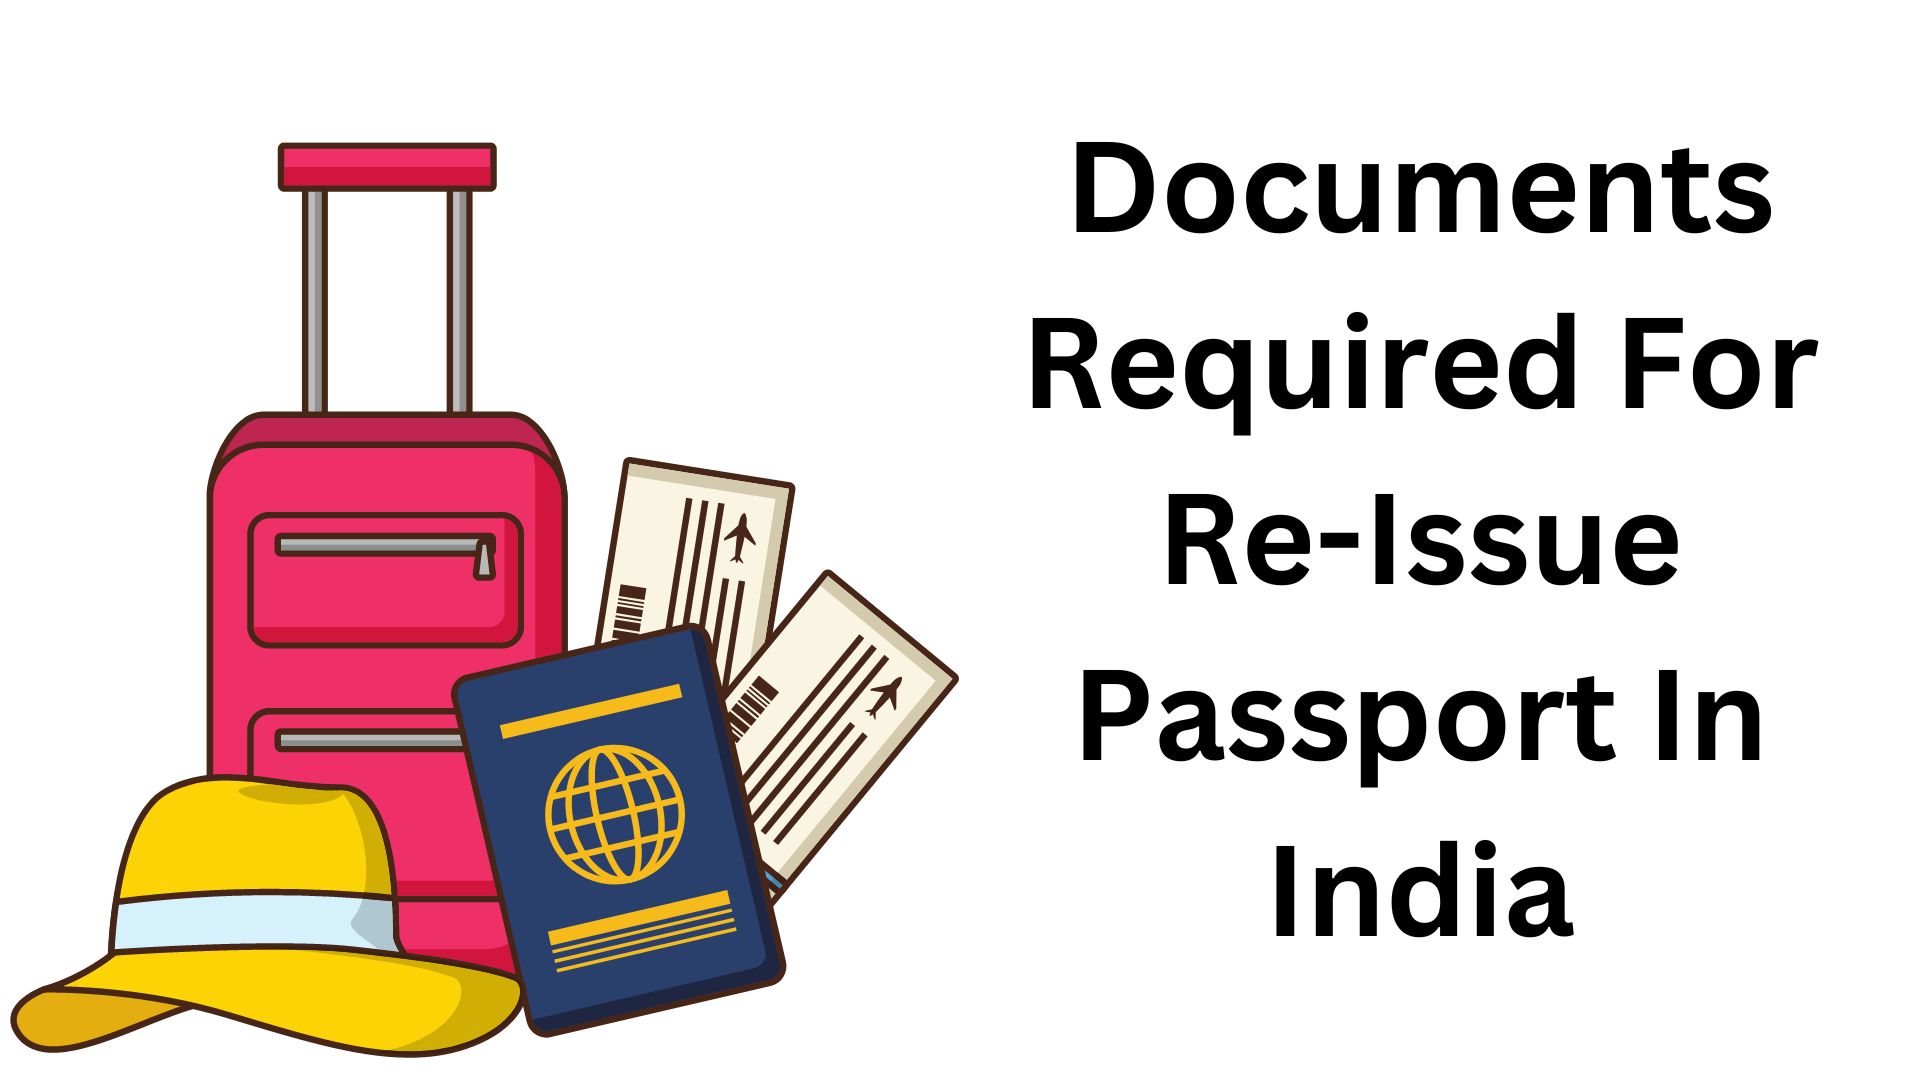 Documents Required For Re-Issue Passport In India